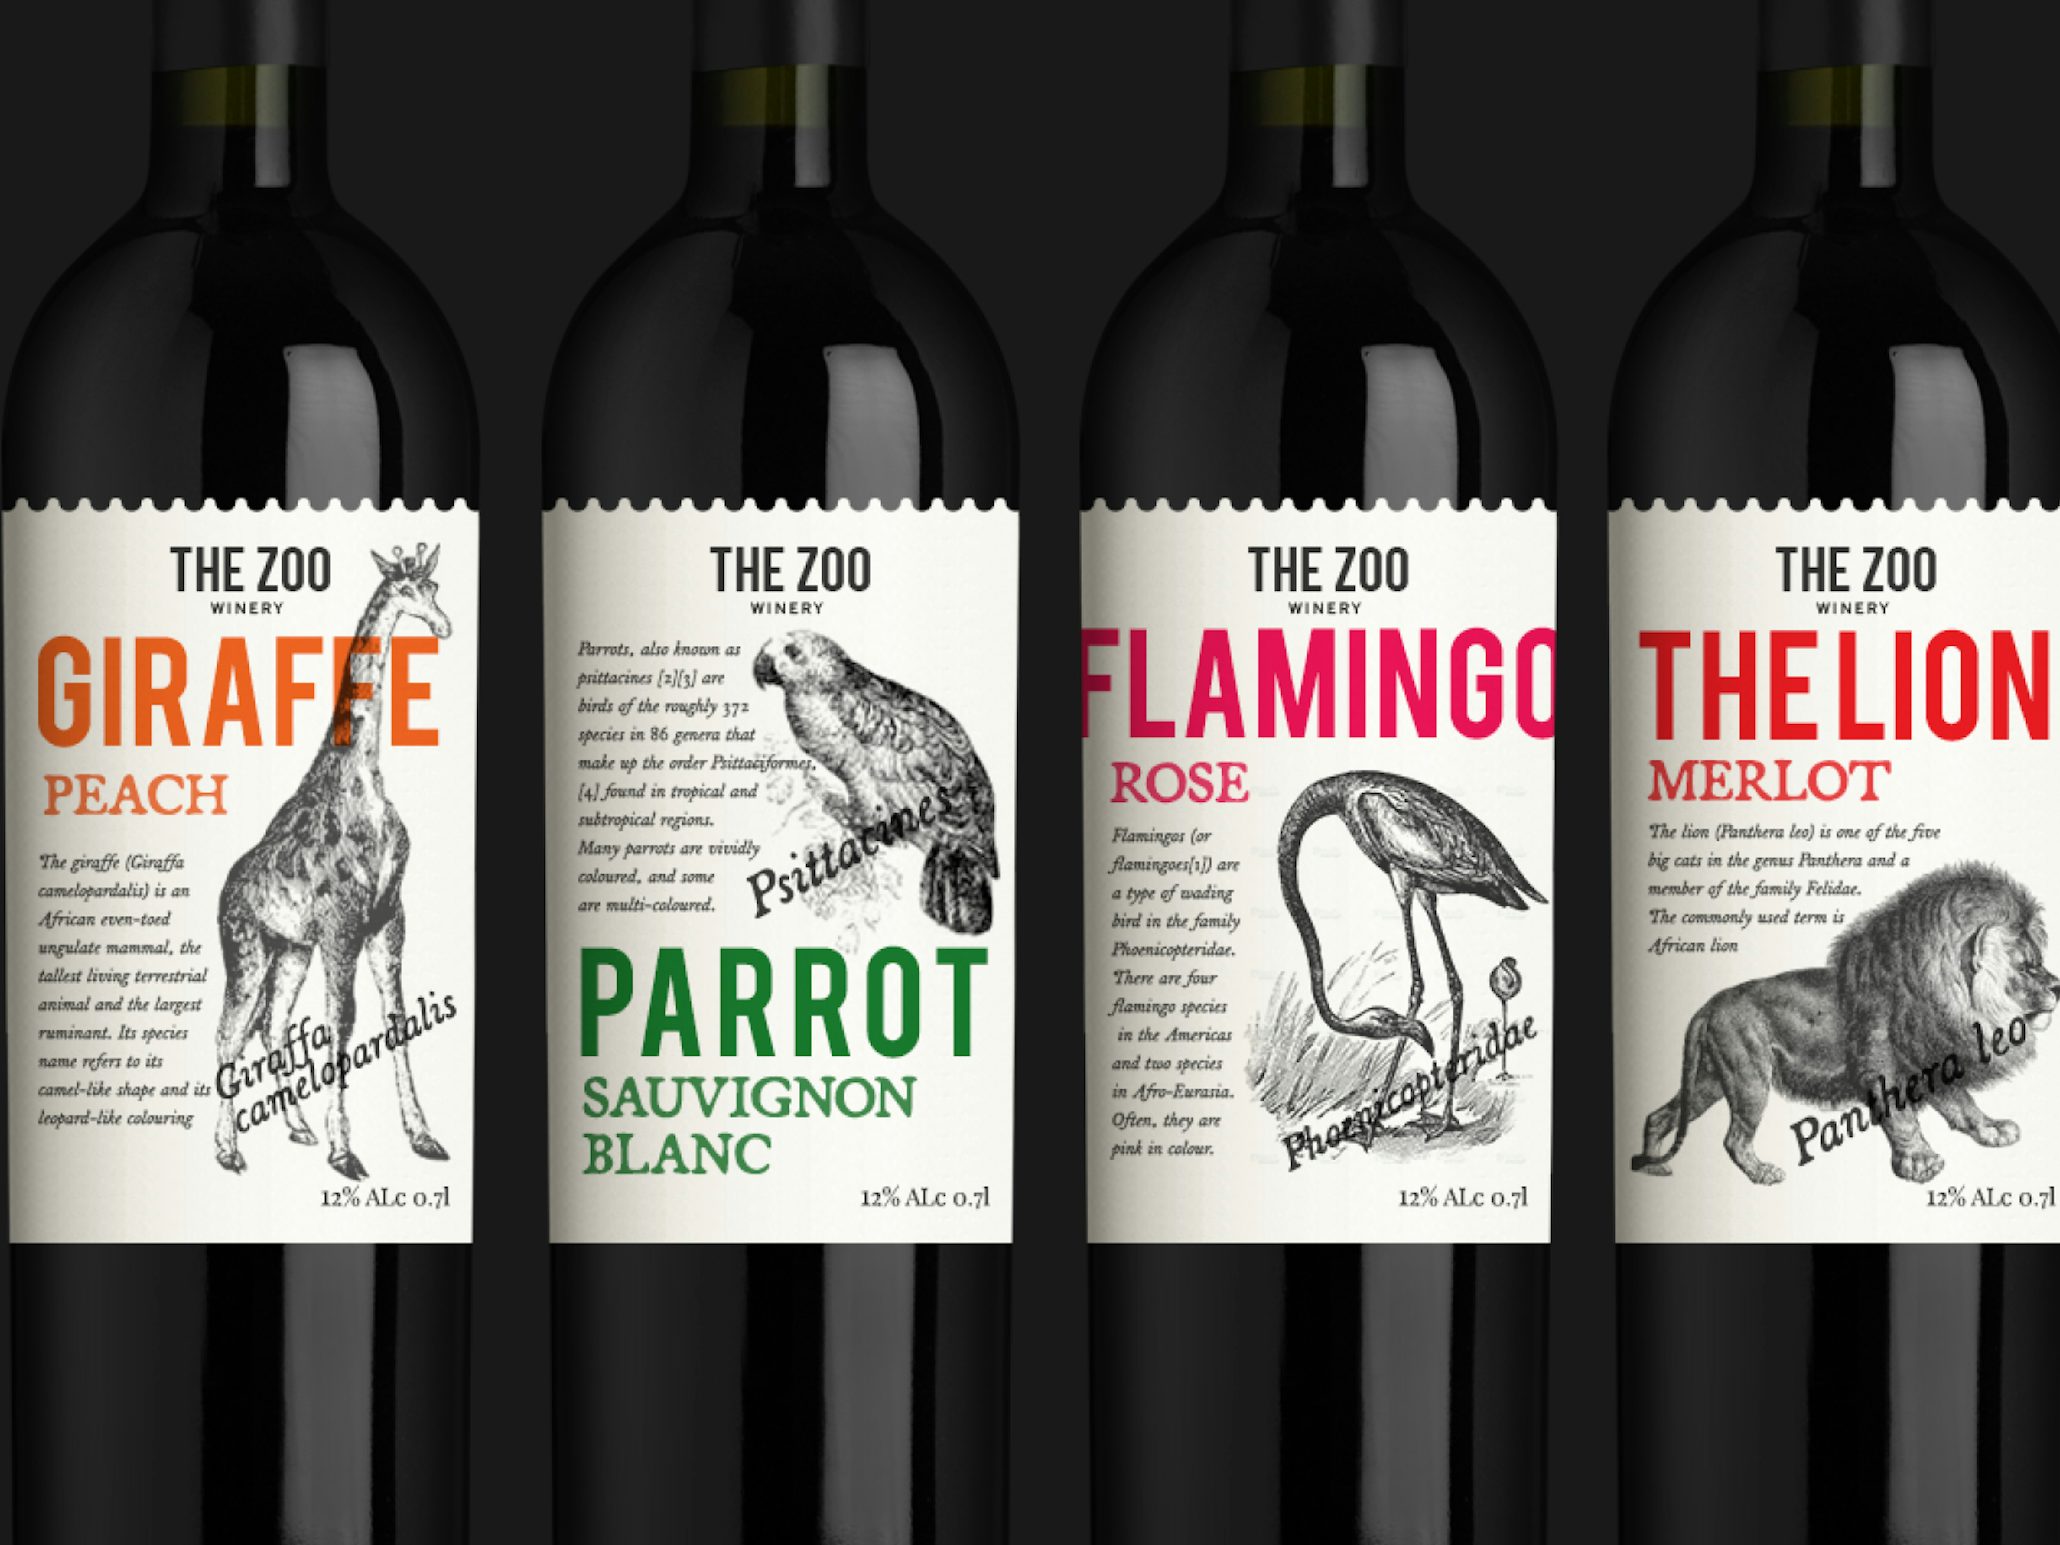 How to design a wine label: the ultimate guide - 99designs